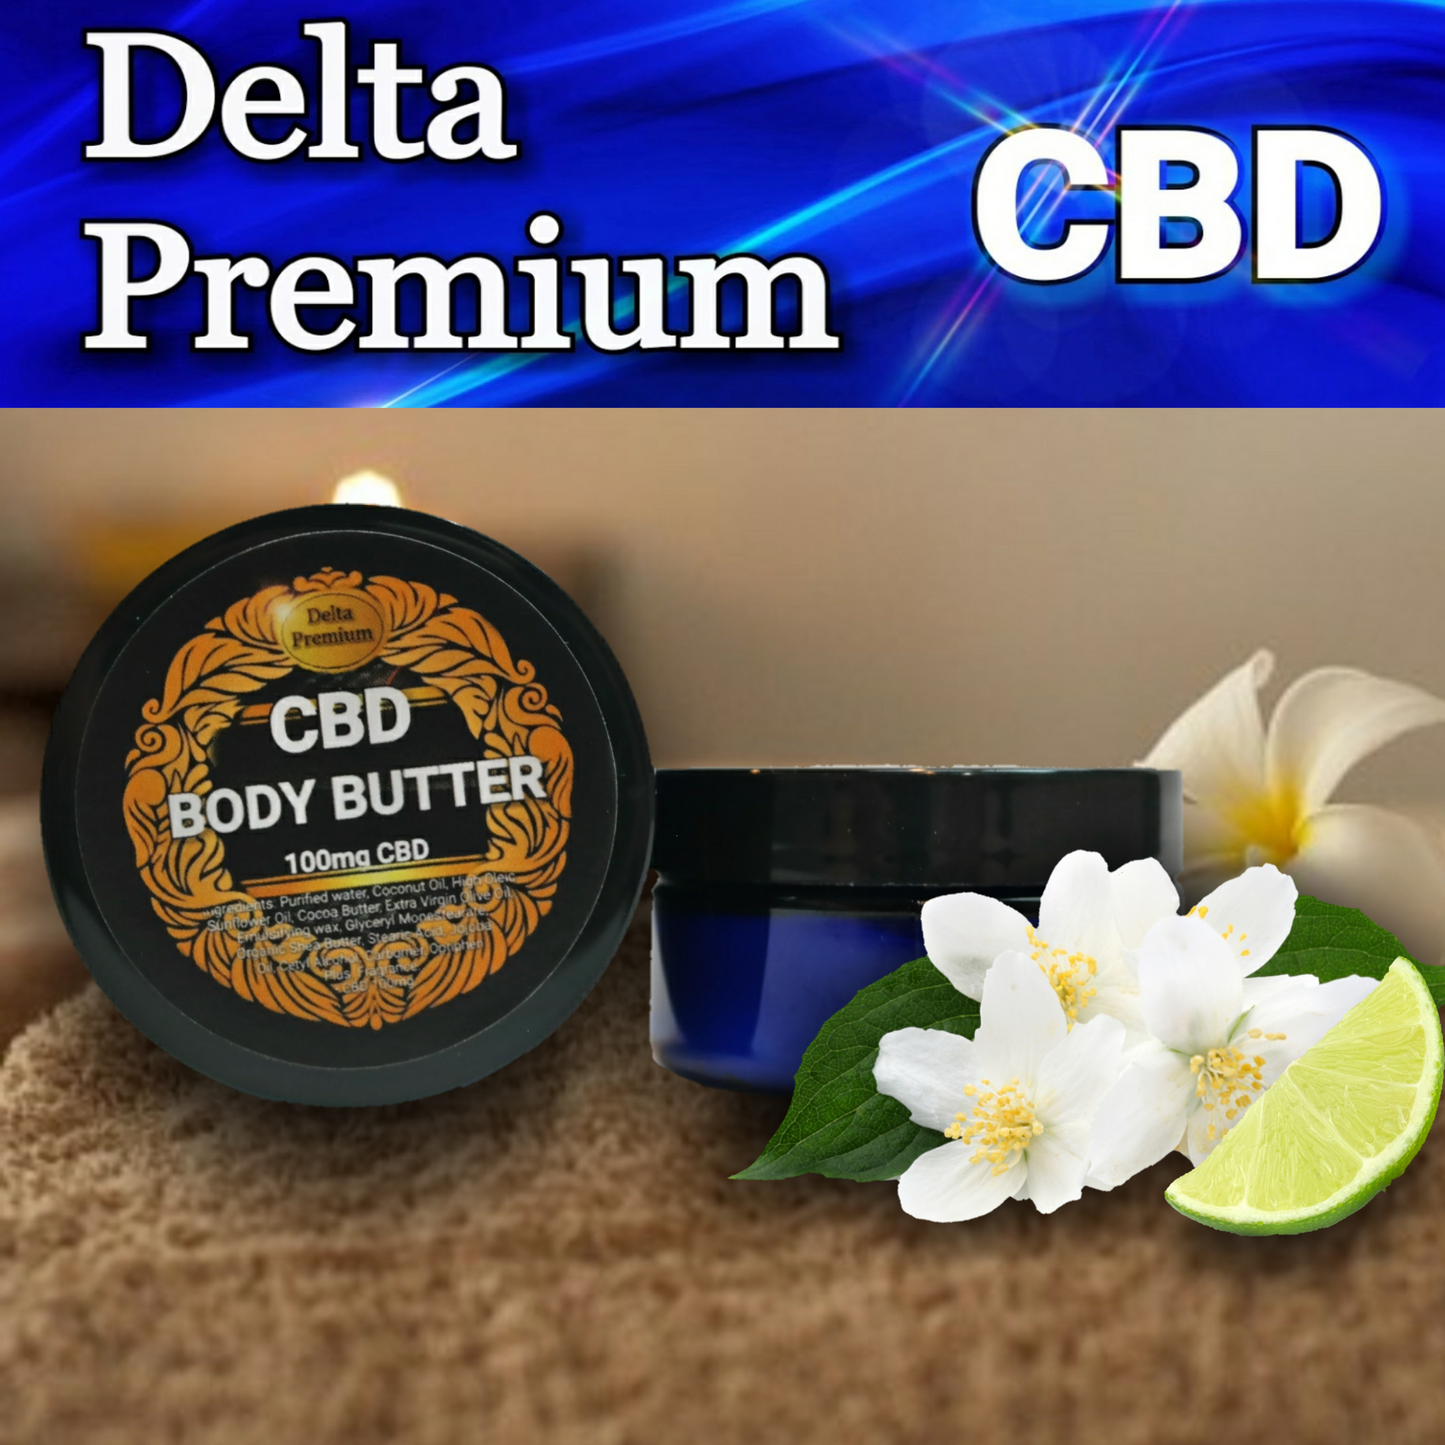 CBD Topical Body Butters Case 200mg to 500mg strength ea. 4oz jars